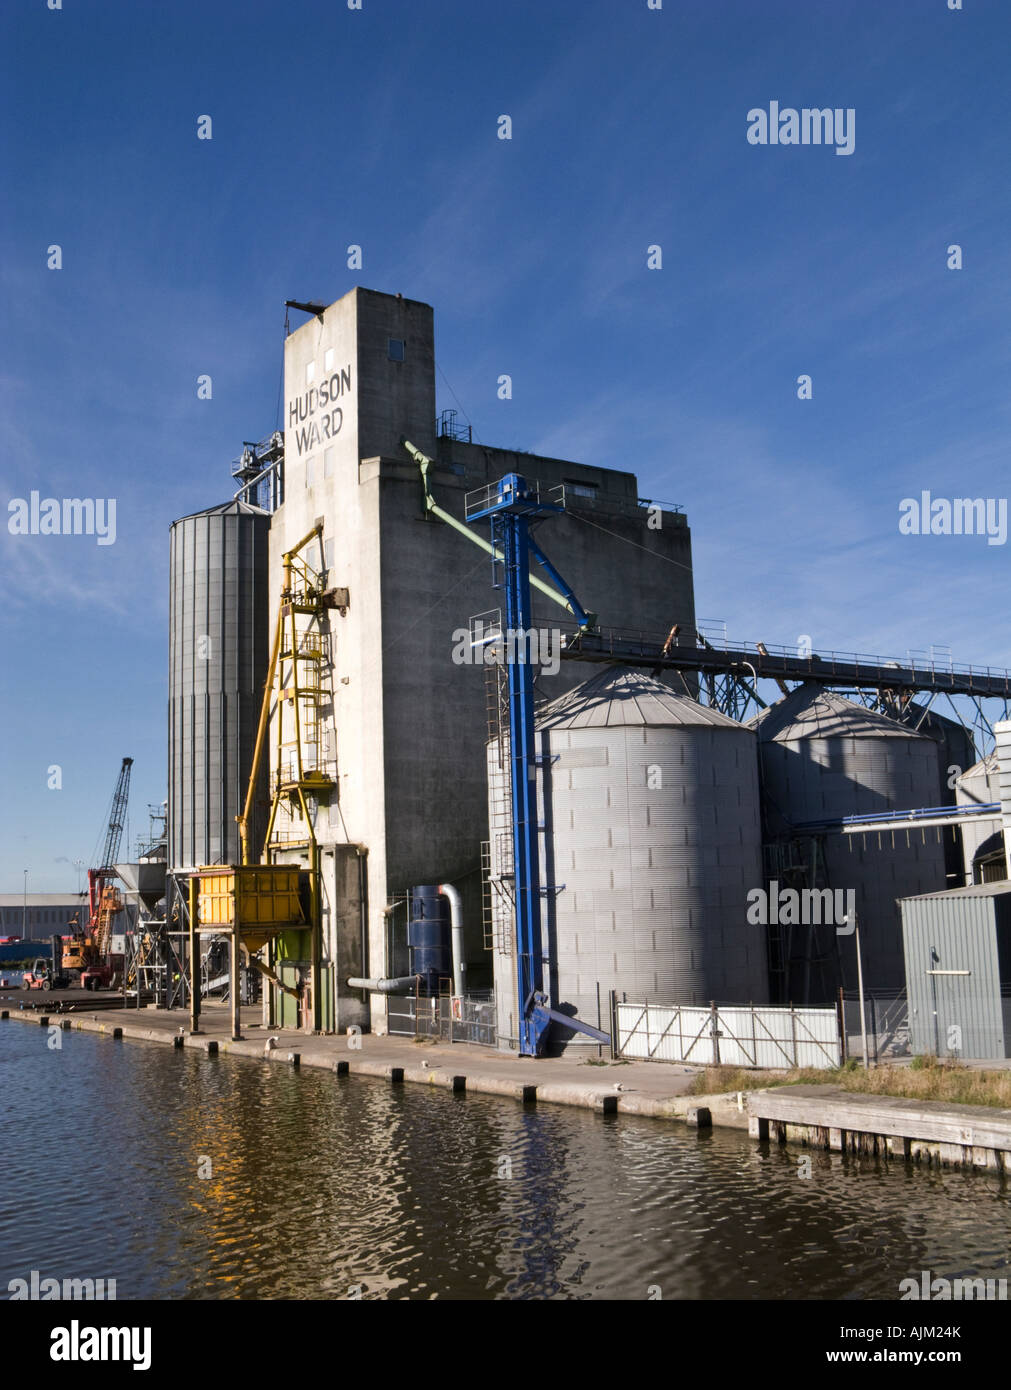 Grain silos at the docks in Goole, East Yorkshire, UK Stock Photo